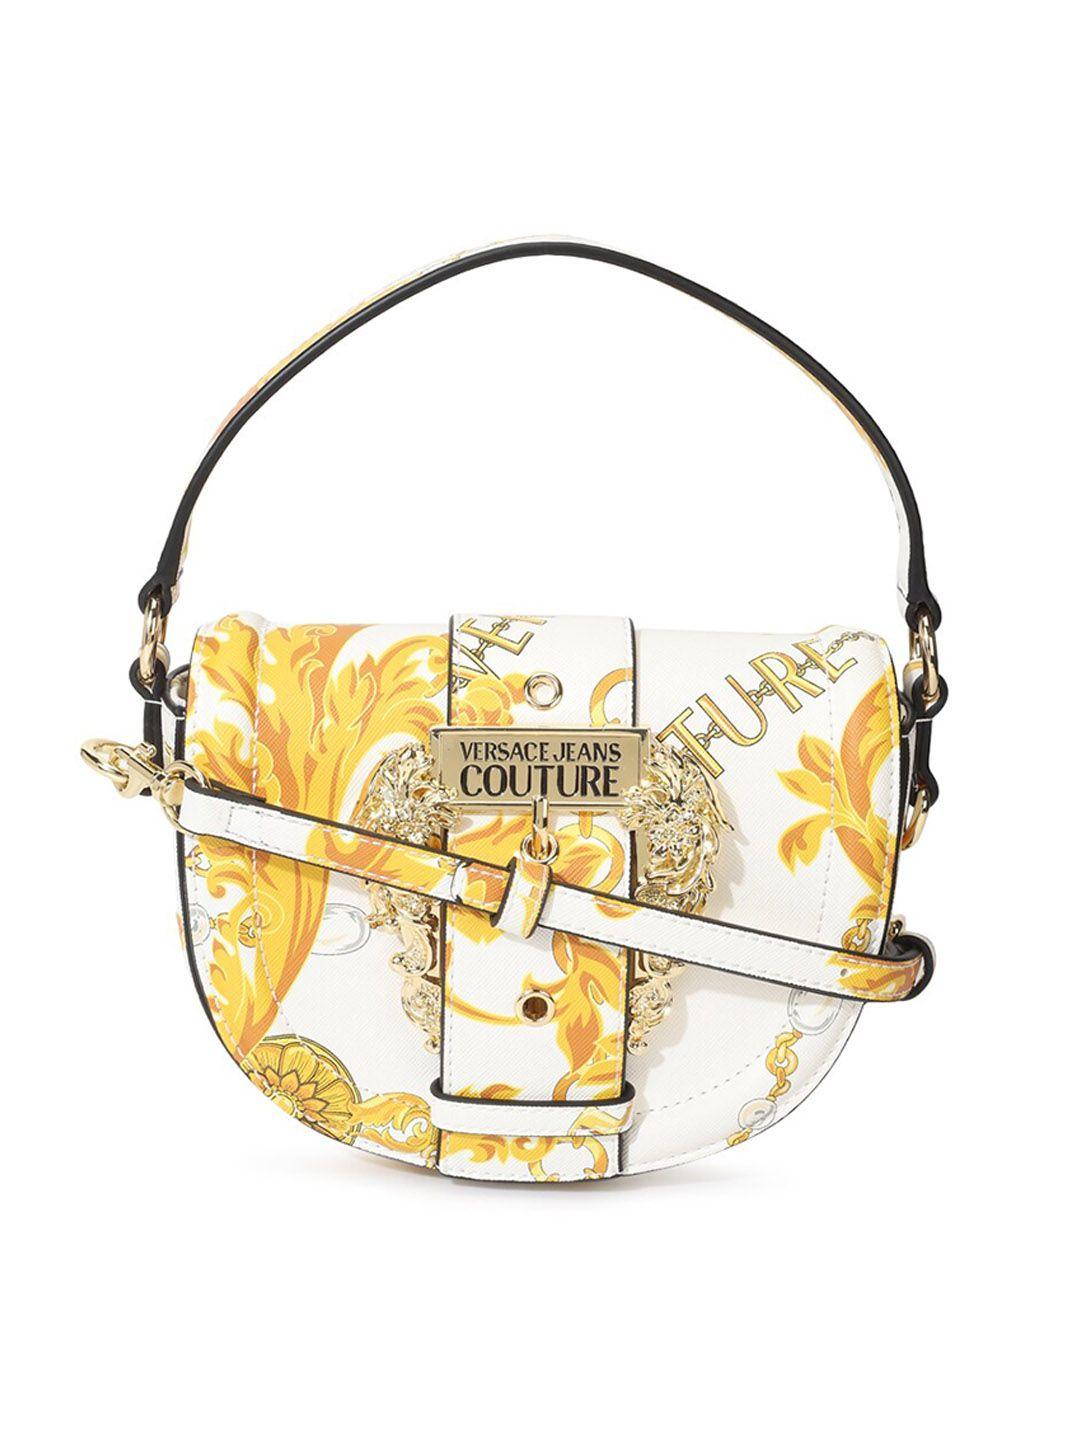 versace jeans couture floral printed structured handheld bag with buckle detail